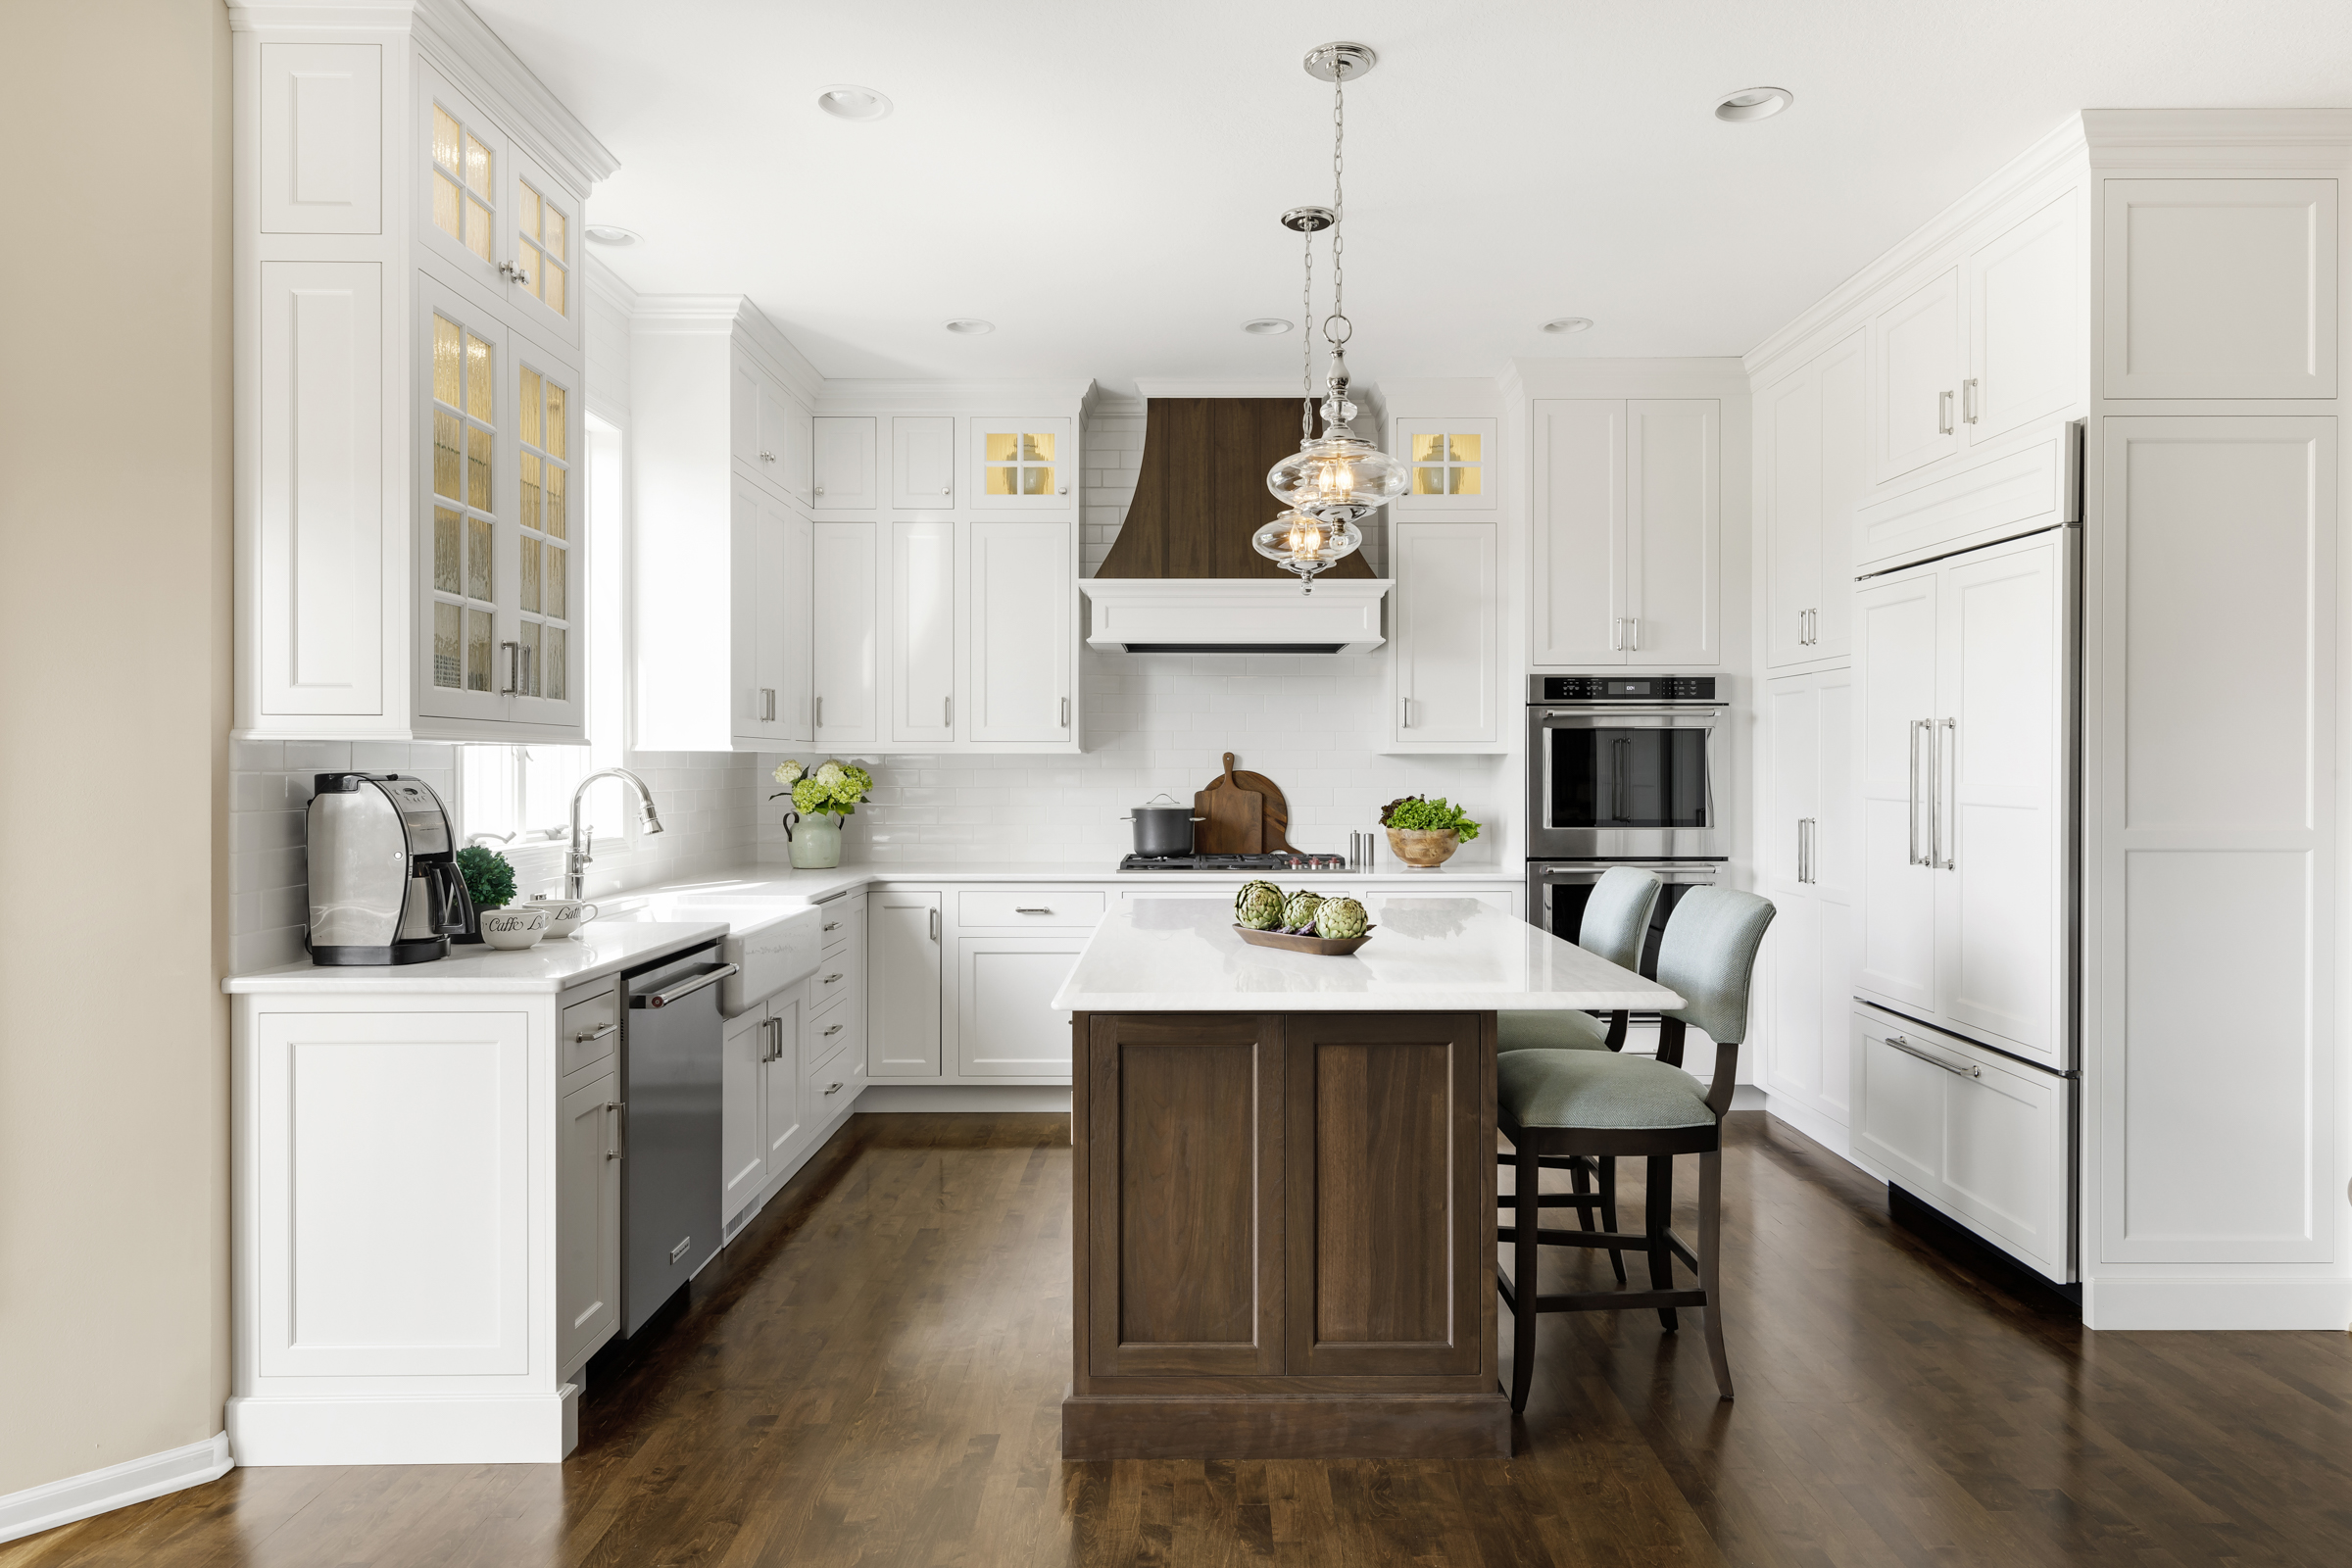 Kitchen remodel with large wooden island and white surrounding cabinets